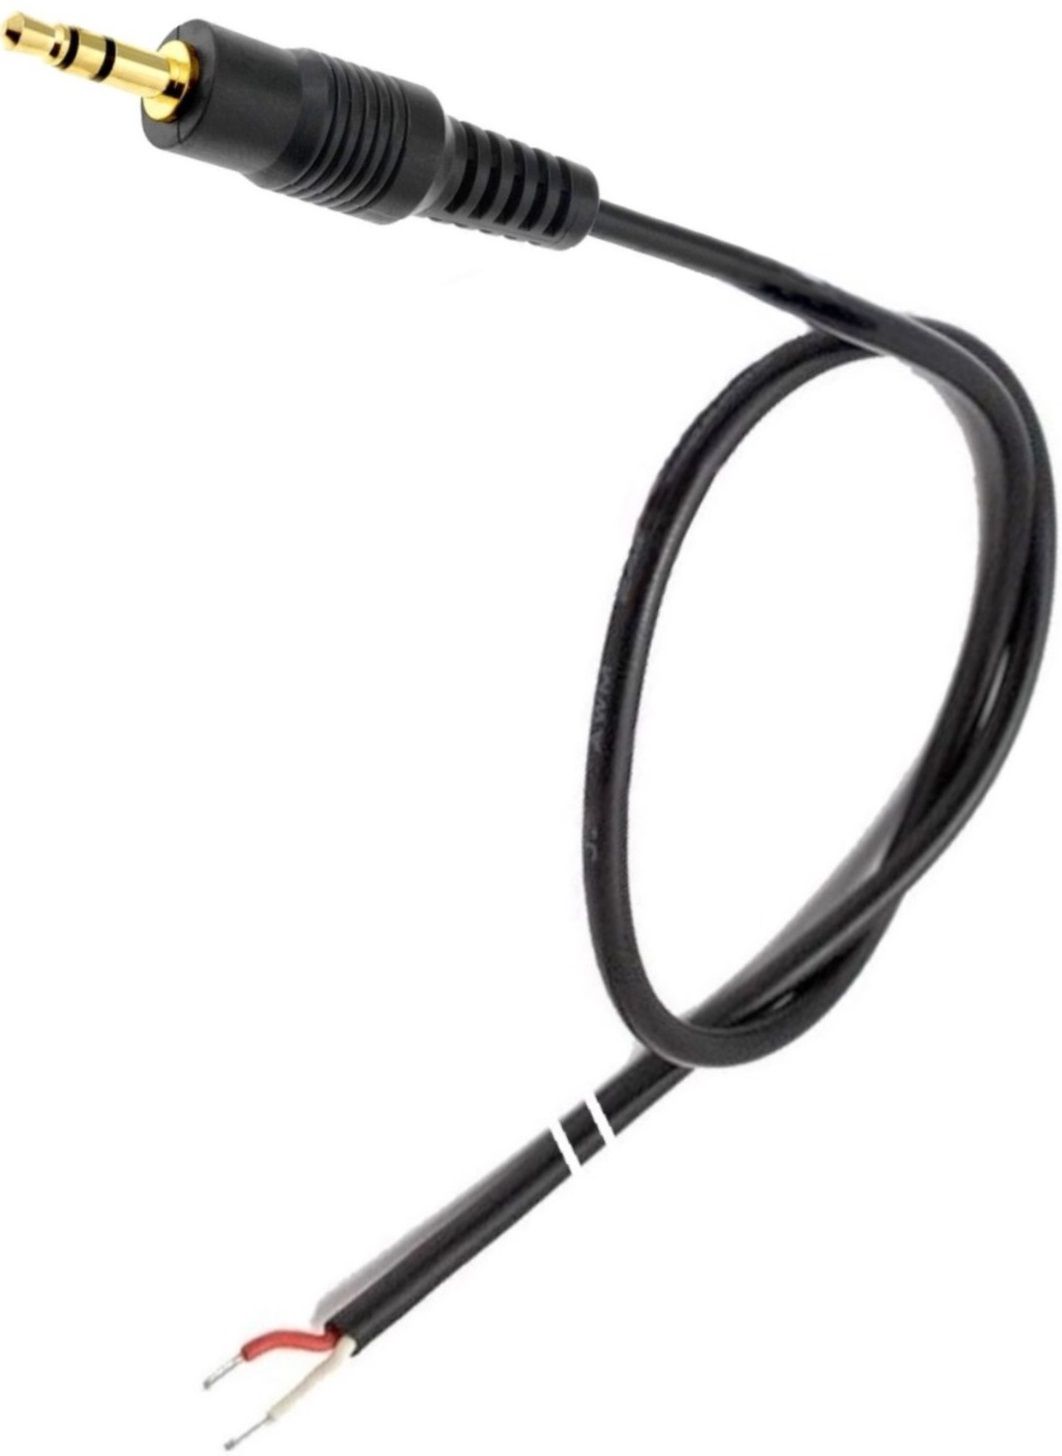 https://www.shoptronica.com/files/Cable%20Jack%203.5%20recto.jpg